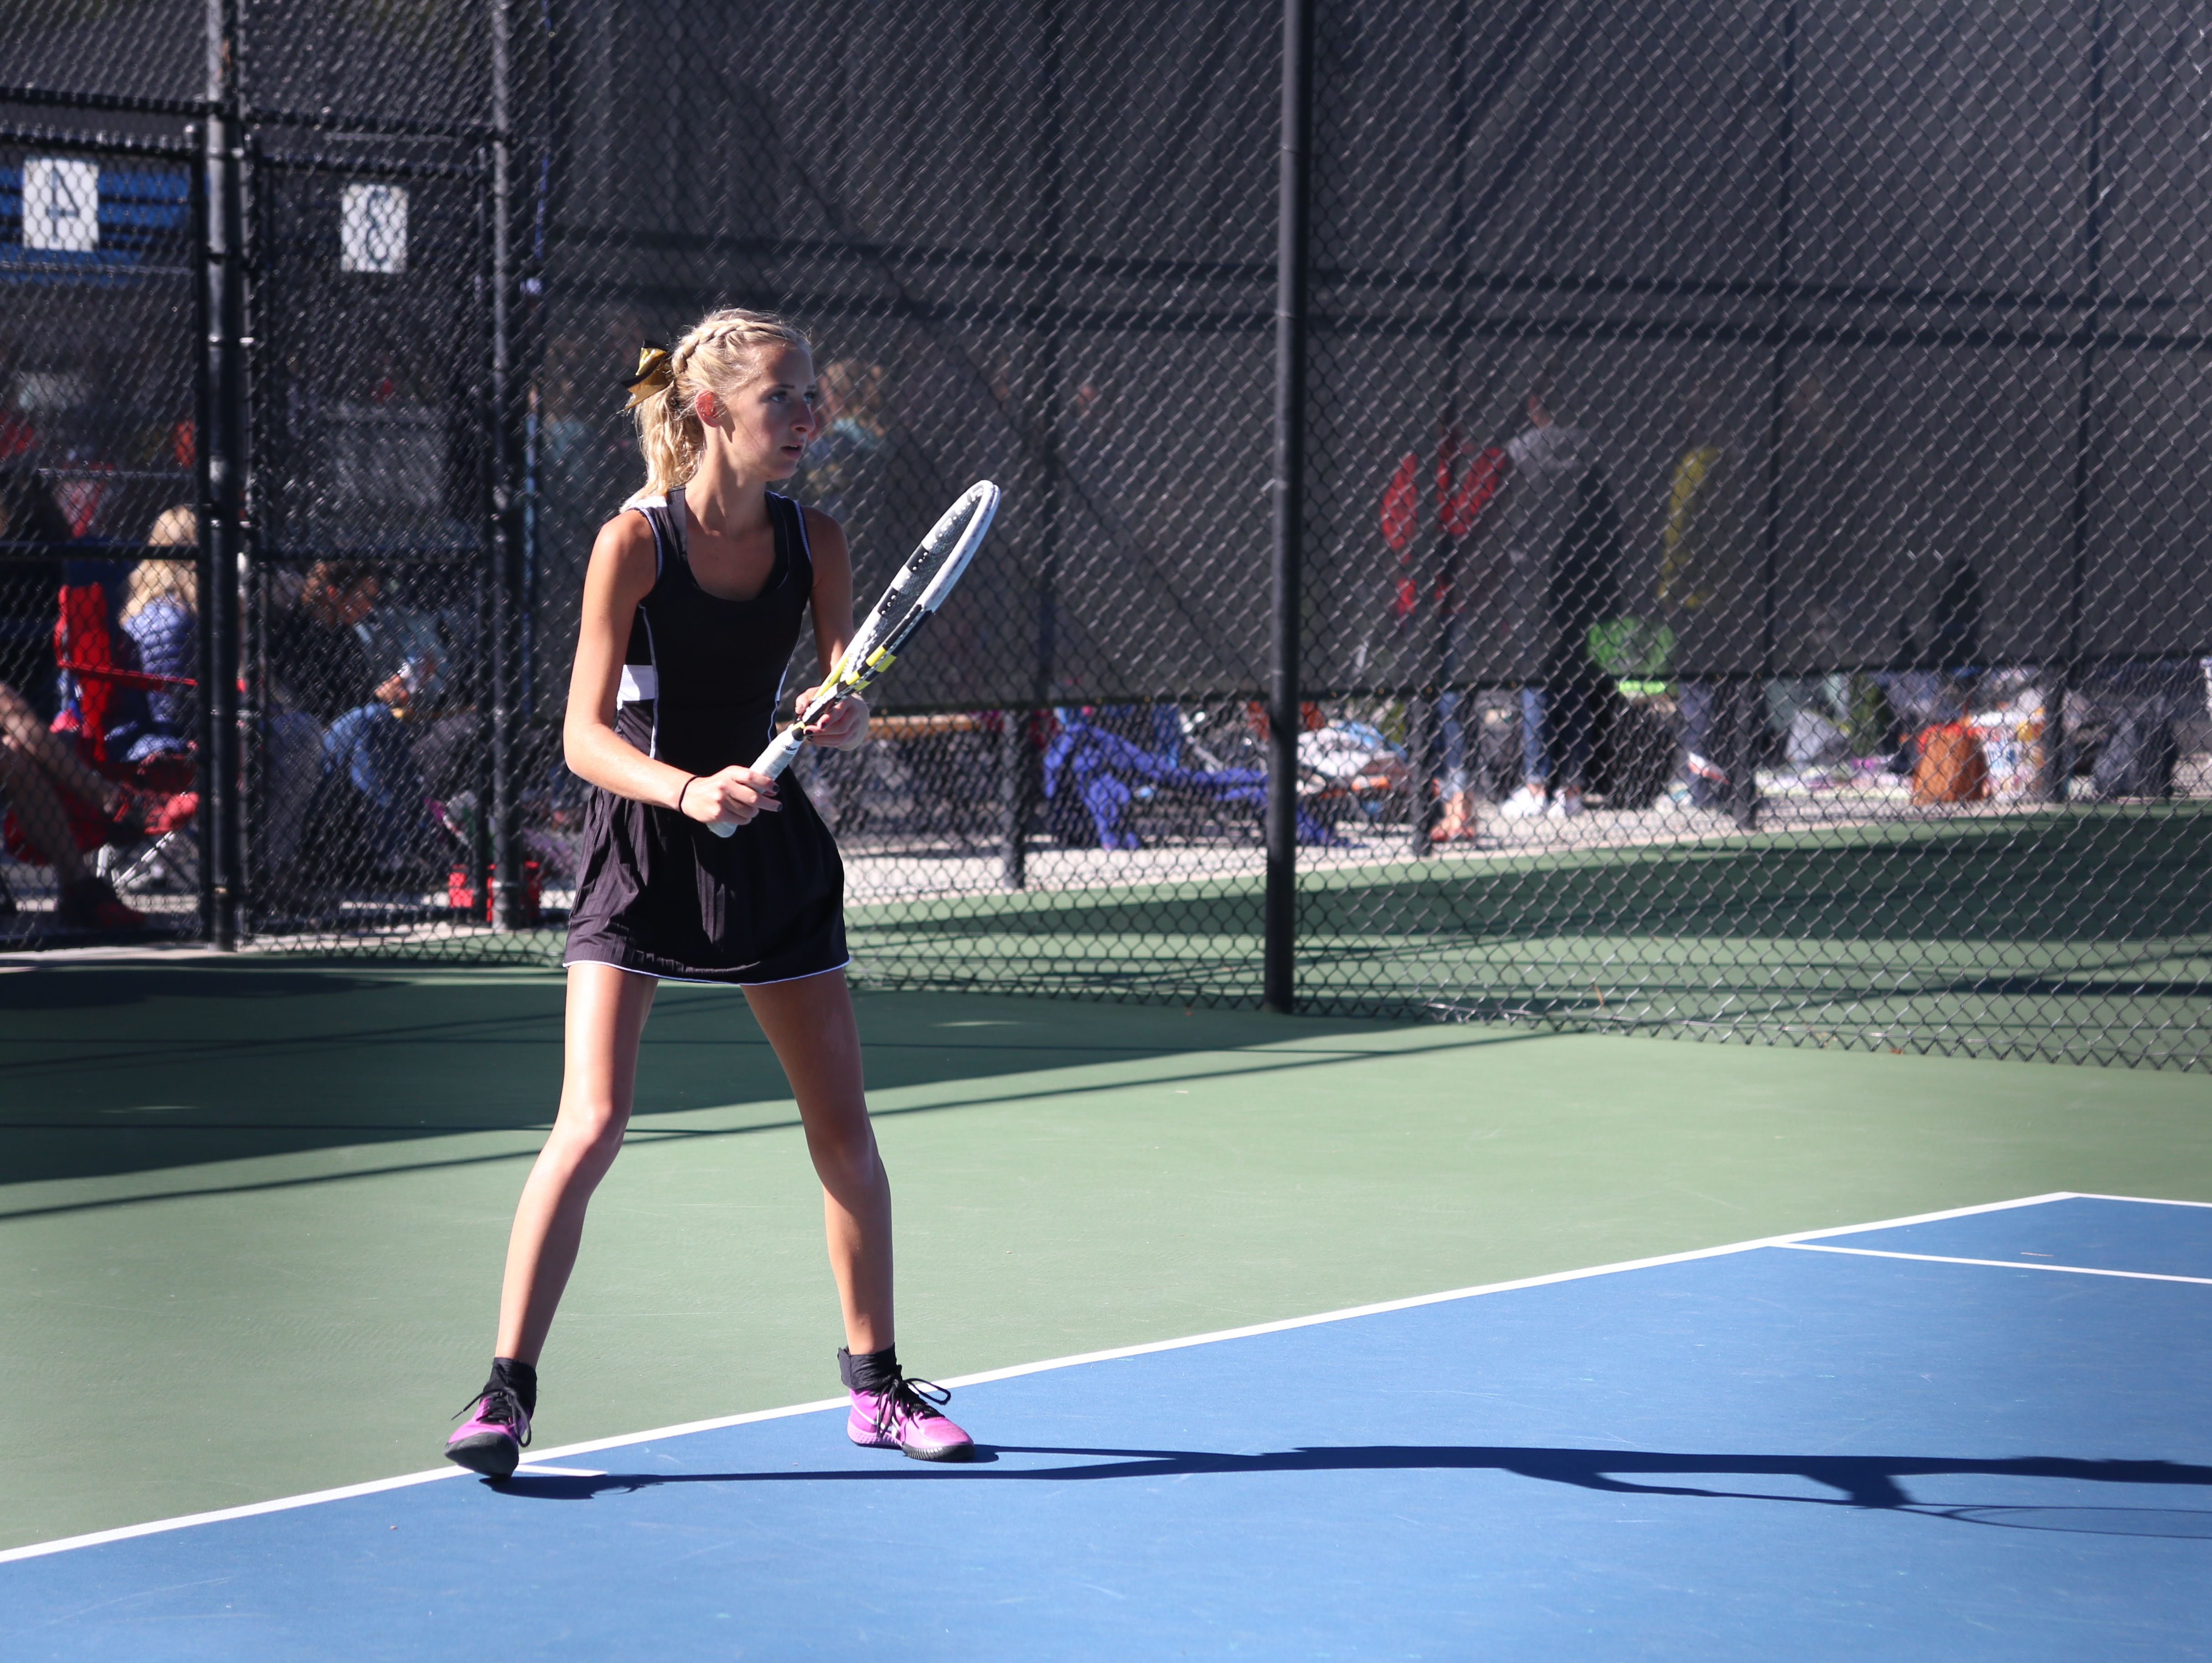 Desert Hills' Abbie Carmack competes during the 3A state tournament at Liberty Park on Friday.